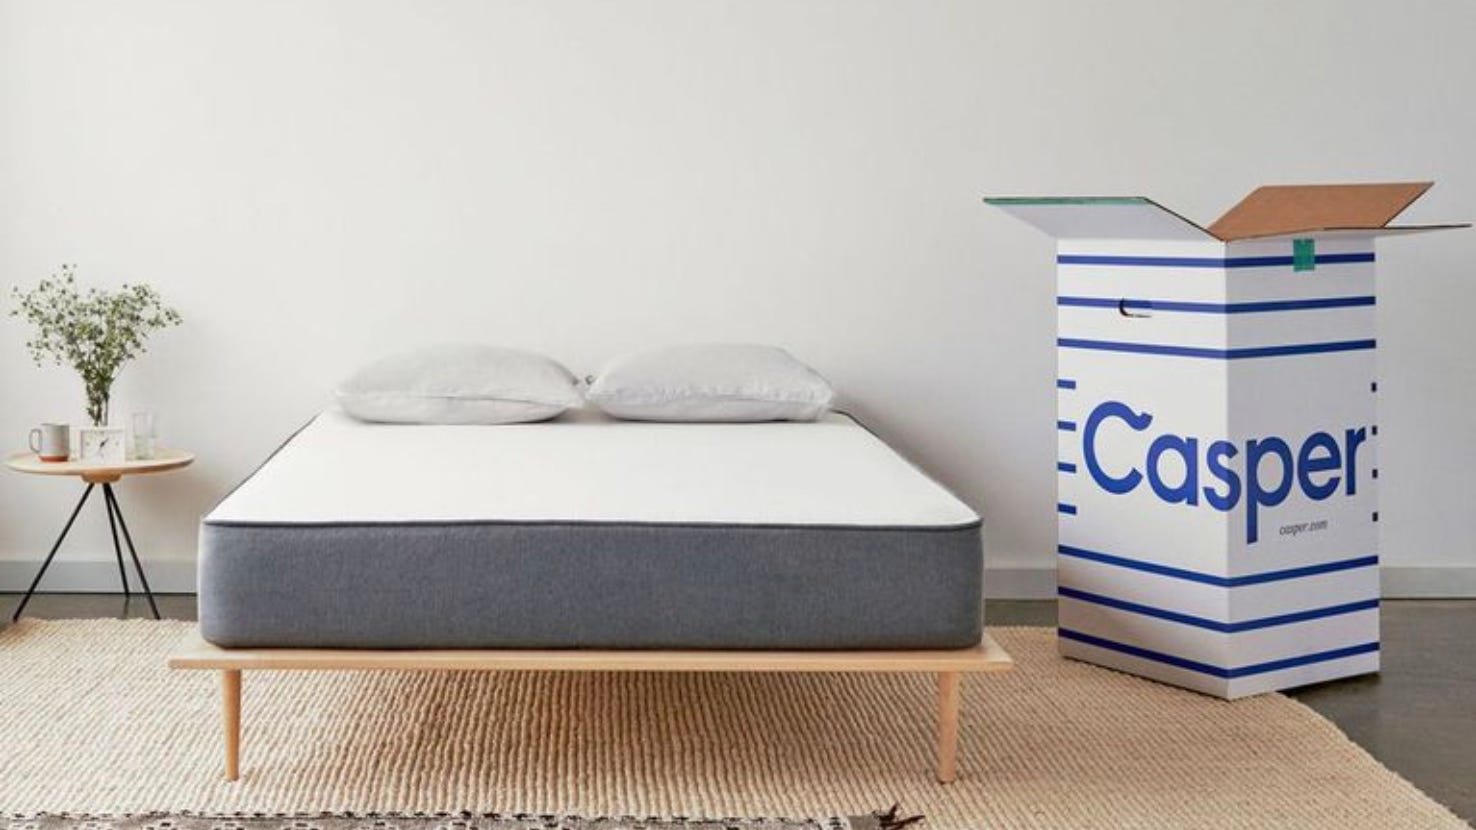 Casper is having a flash sale on their most popular mattresses right now